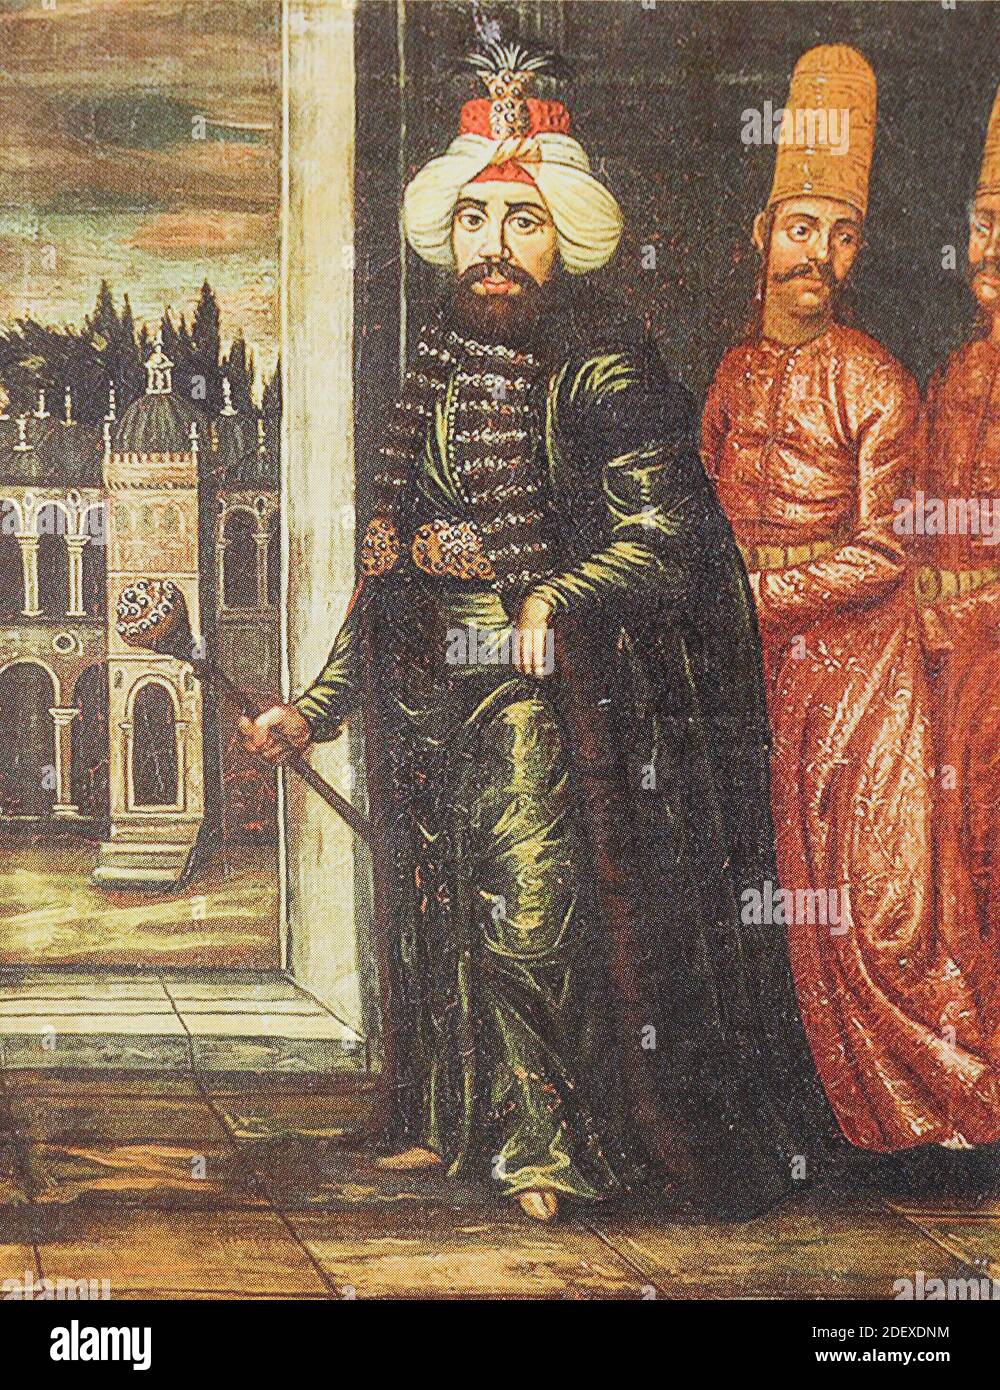 Portrait of the sultan of the Ottoman Empire Ahmed III (30 December 1673 – 1 July 1736). Turkish miniature. Ahmed III was Sultan of the Ottoman Empire and a son of Sultan Mehmed IV (r. 1648–87). His mother was Gülnuş Sultan, originally named Evmenia Voria, who was an ethnic Greek. He was born at Hacıoğlu Pazarcık, in Dobruja. Stock Photo